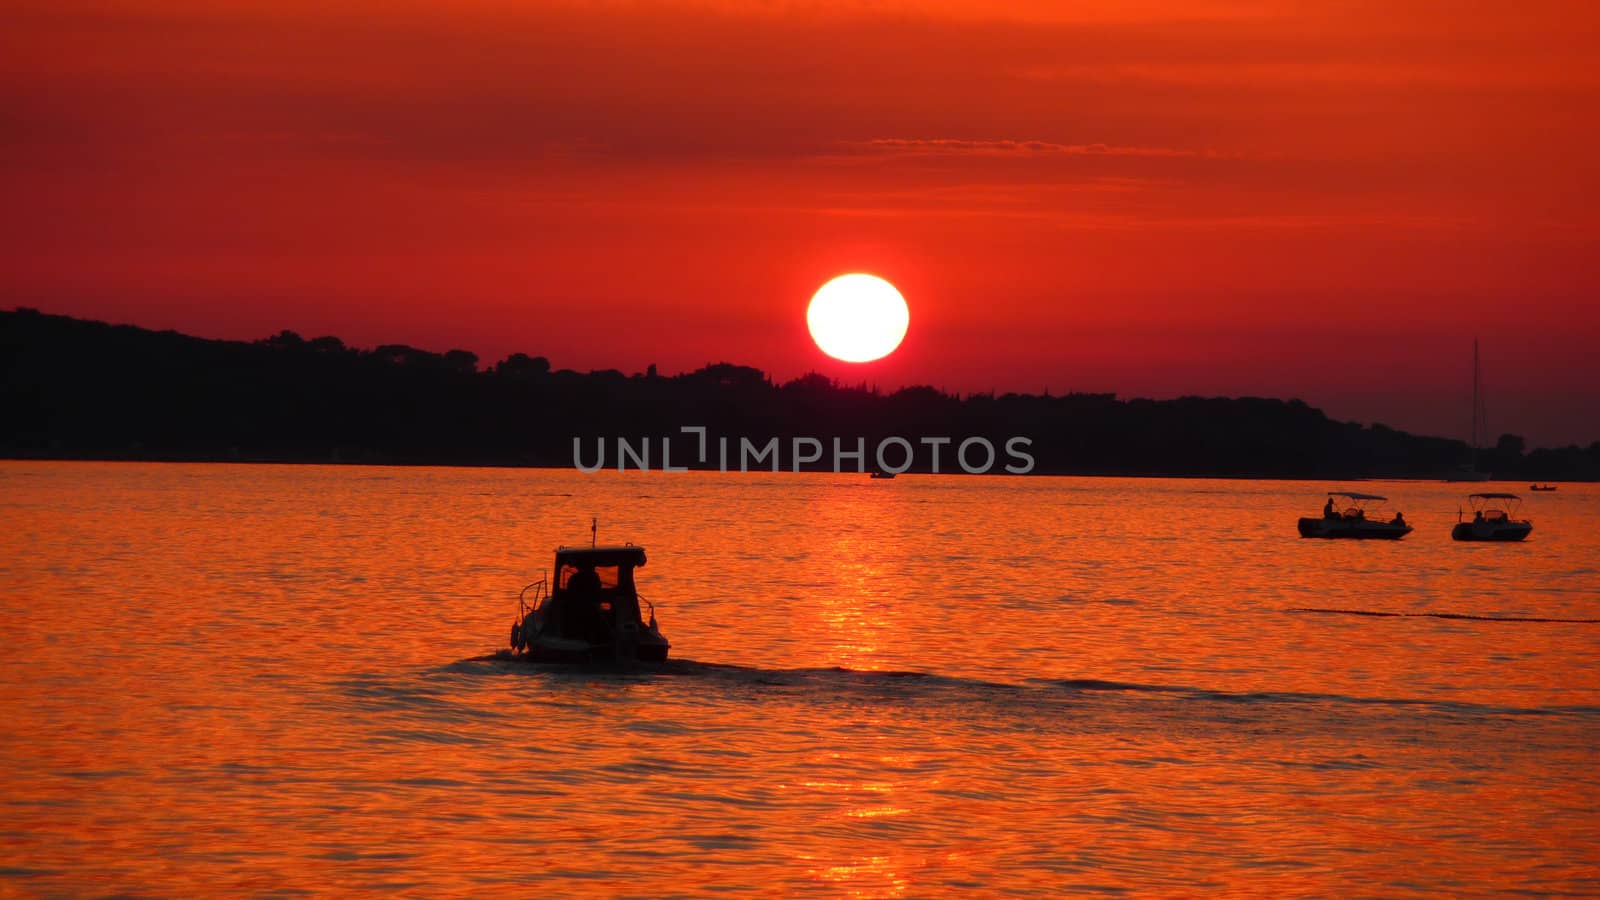 Fishermen silhouette on sea at red sunset near Brioni nationl park